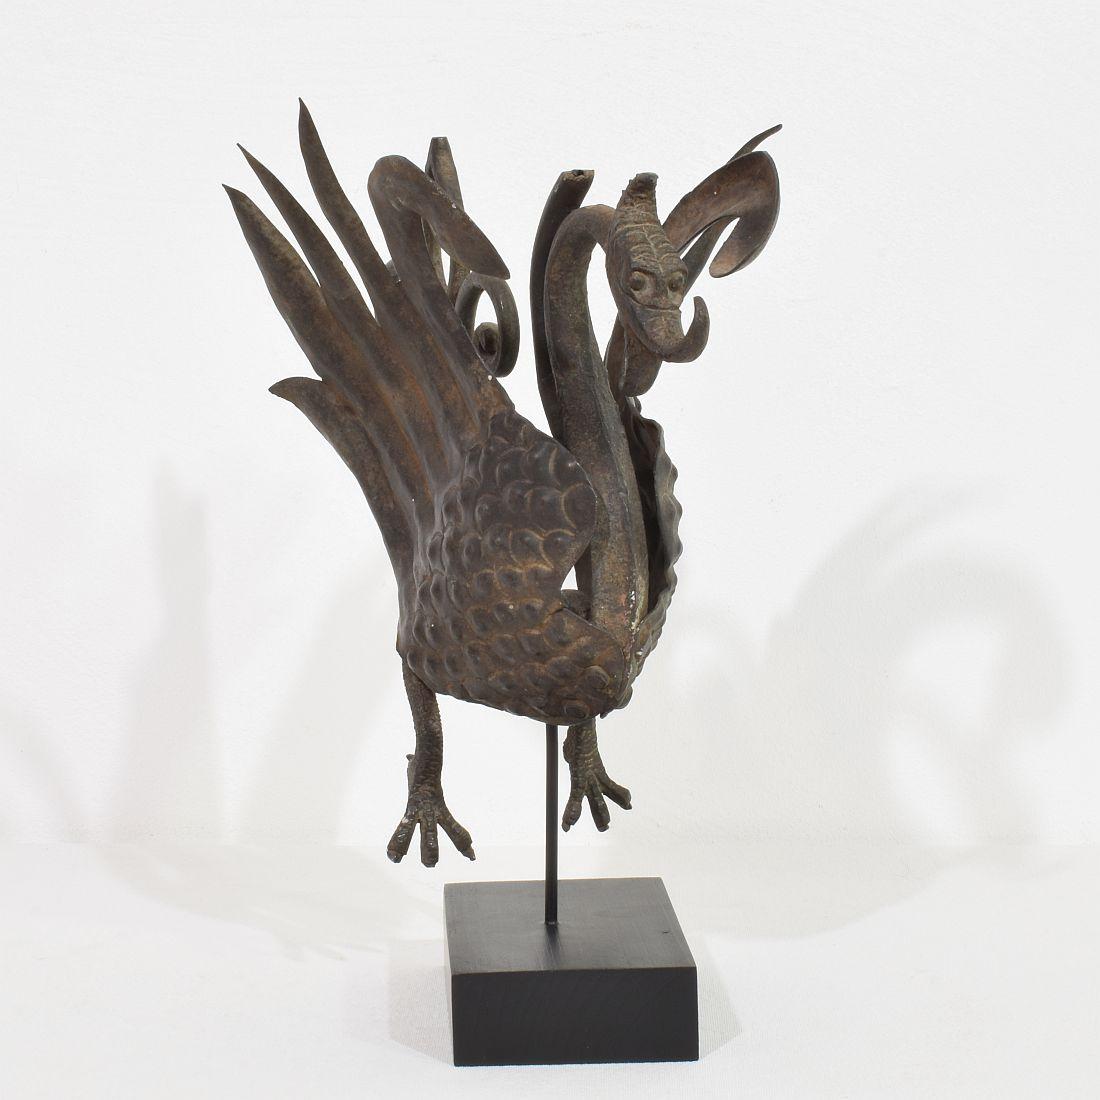 Spanish 19th Century Hand Forged Iron Bird Fragment In Good Condition For Sale In Buisson, FR